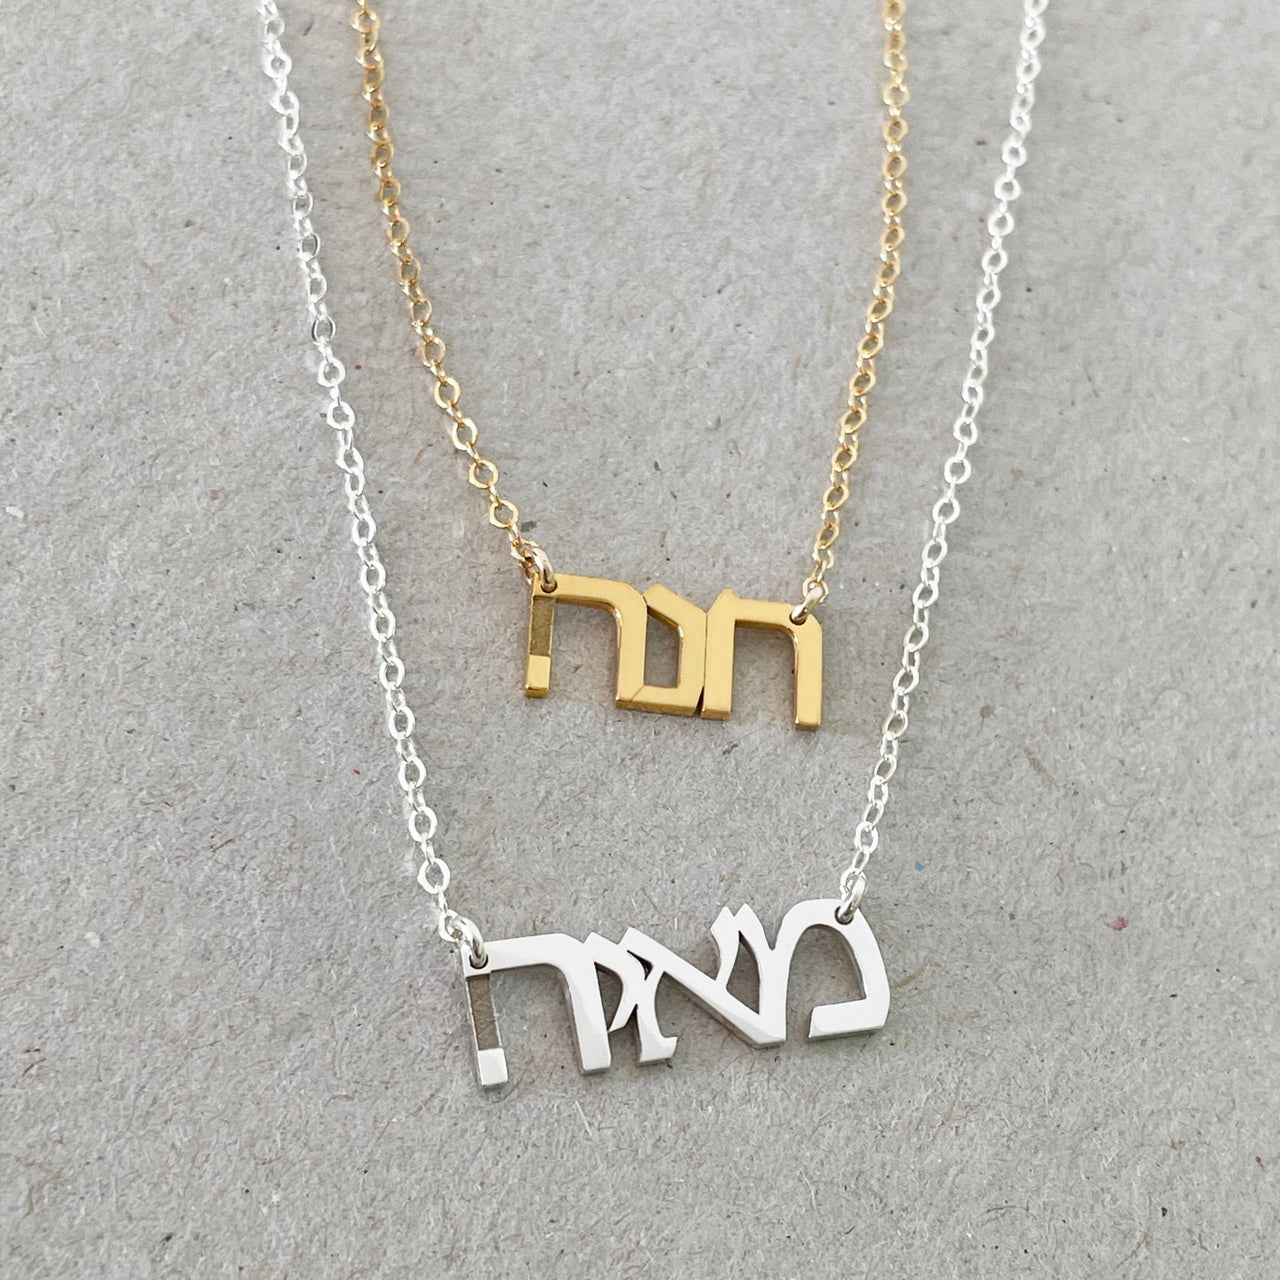 Miriam Merenfeld Jewelry Necklaces Galia Hebrew Nameplate Necklace - Sterling Silver, Gold Vermeil or Two-Tone